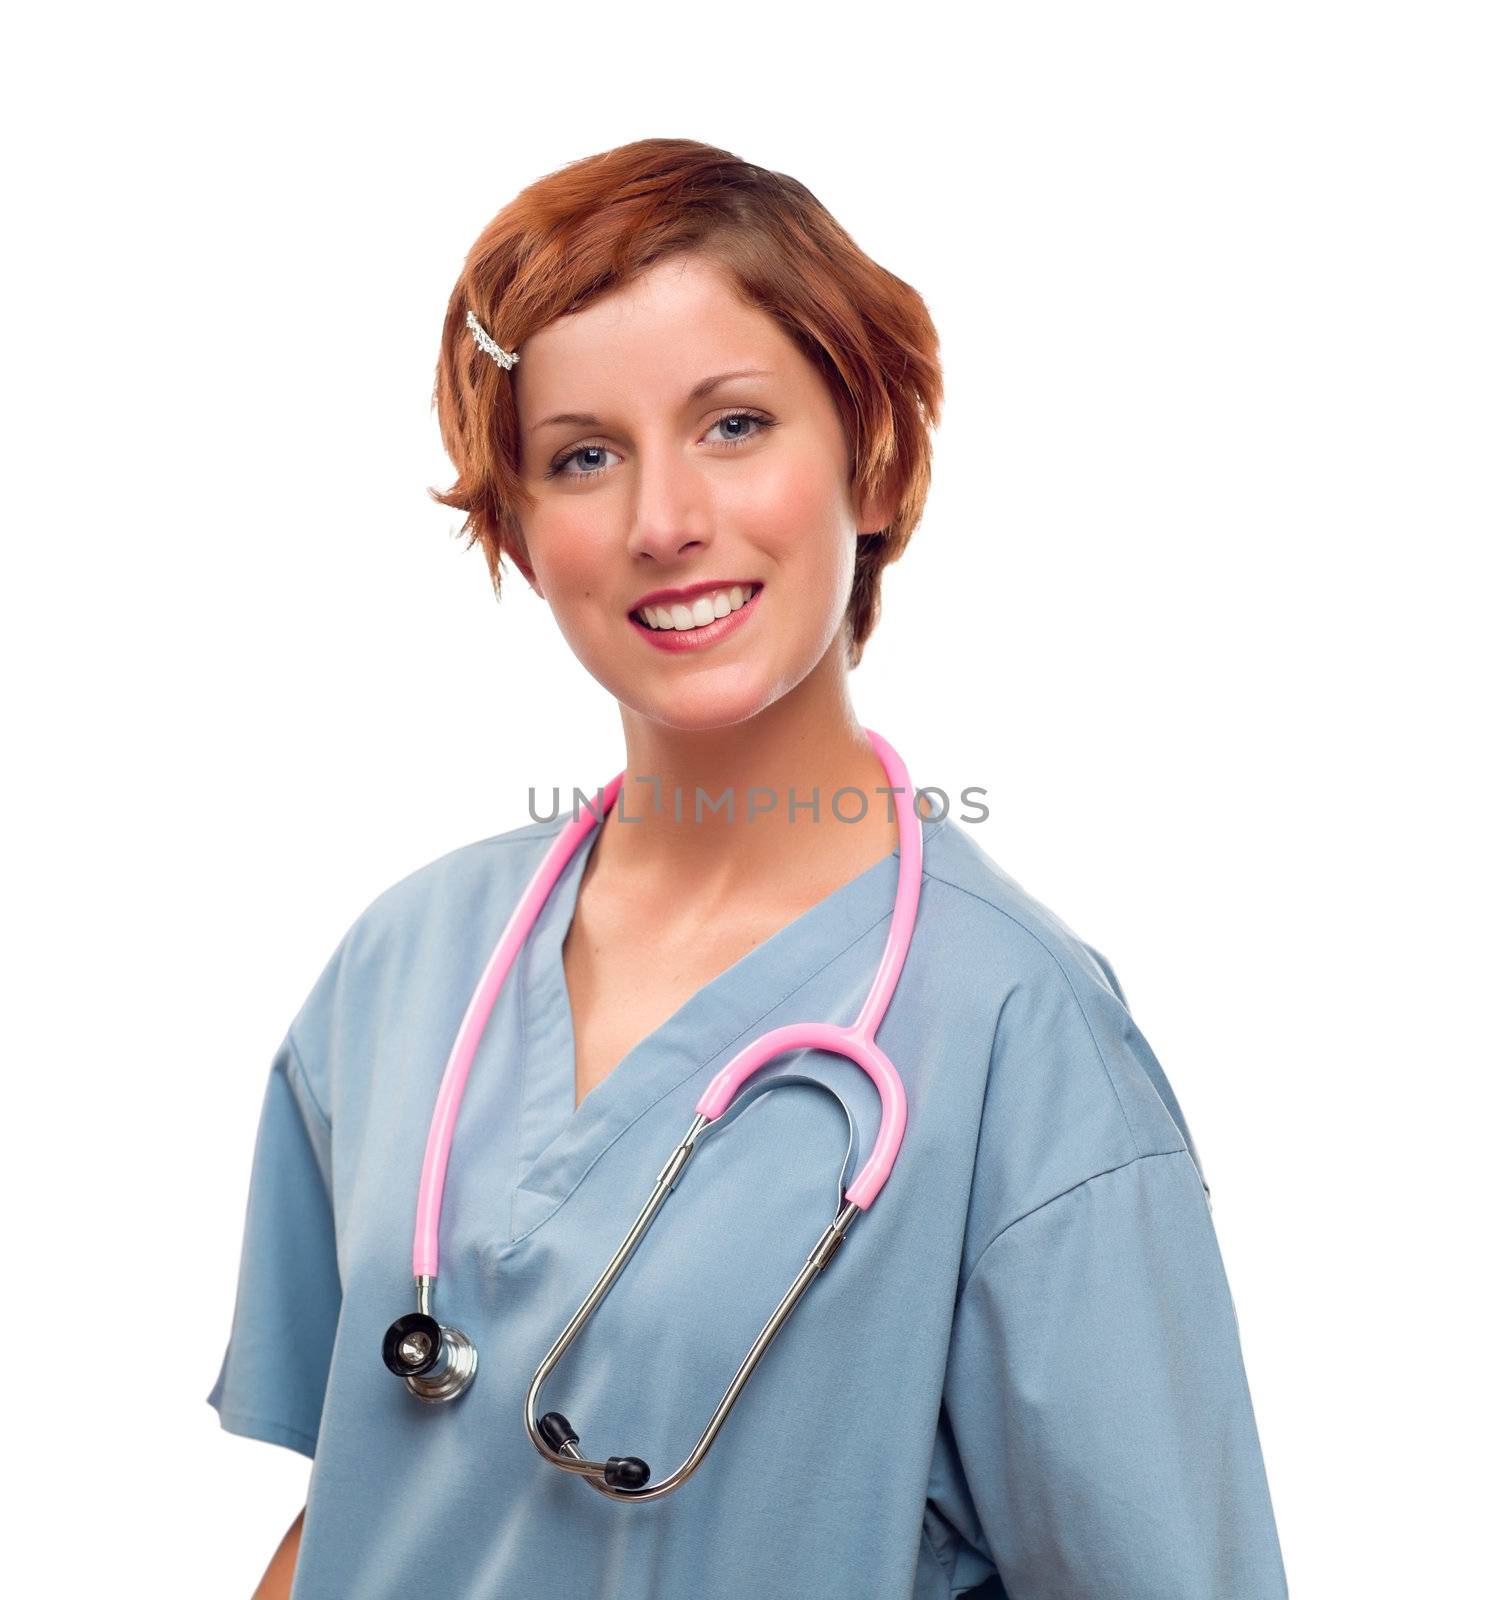 Smiling Female Doctor or Nurse on White by Feverpitched